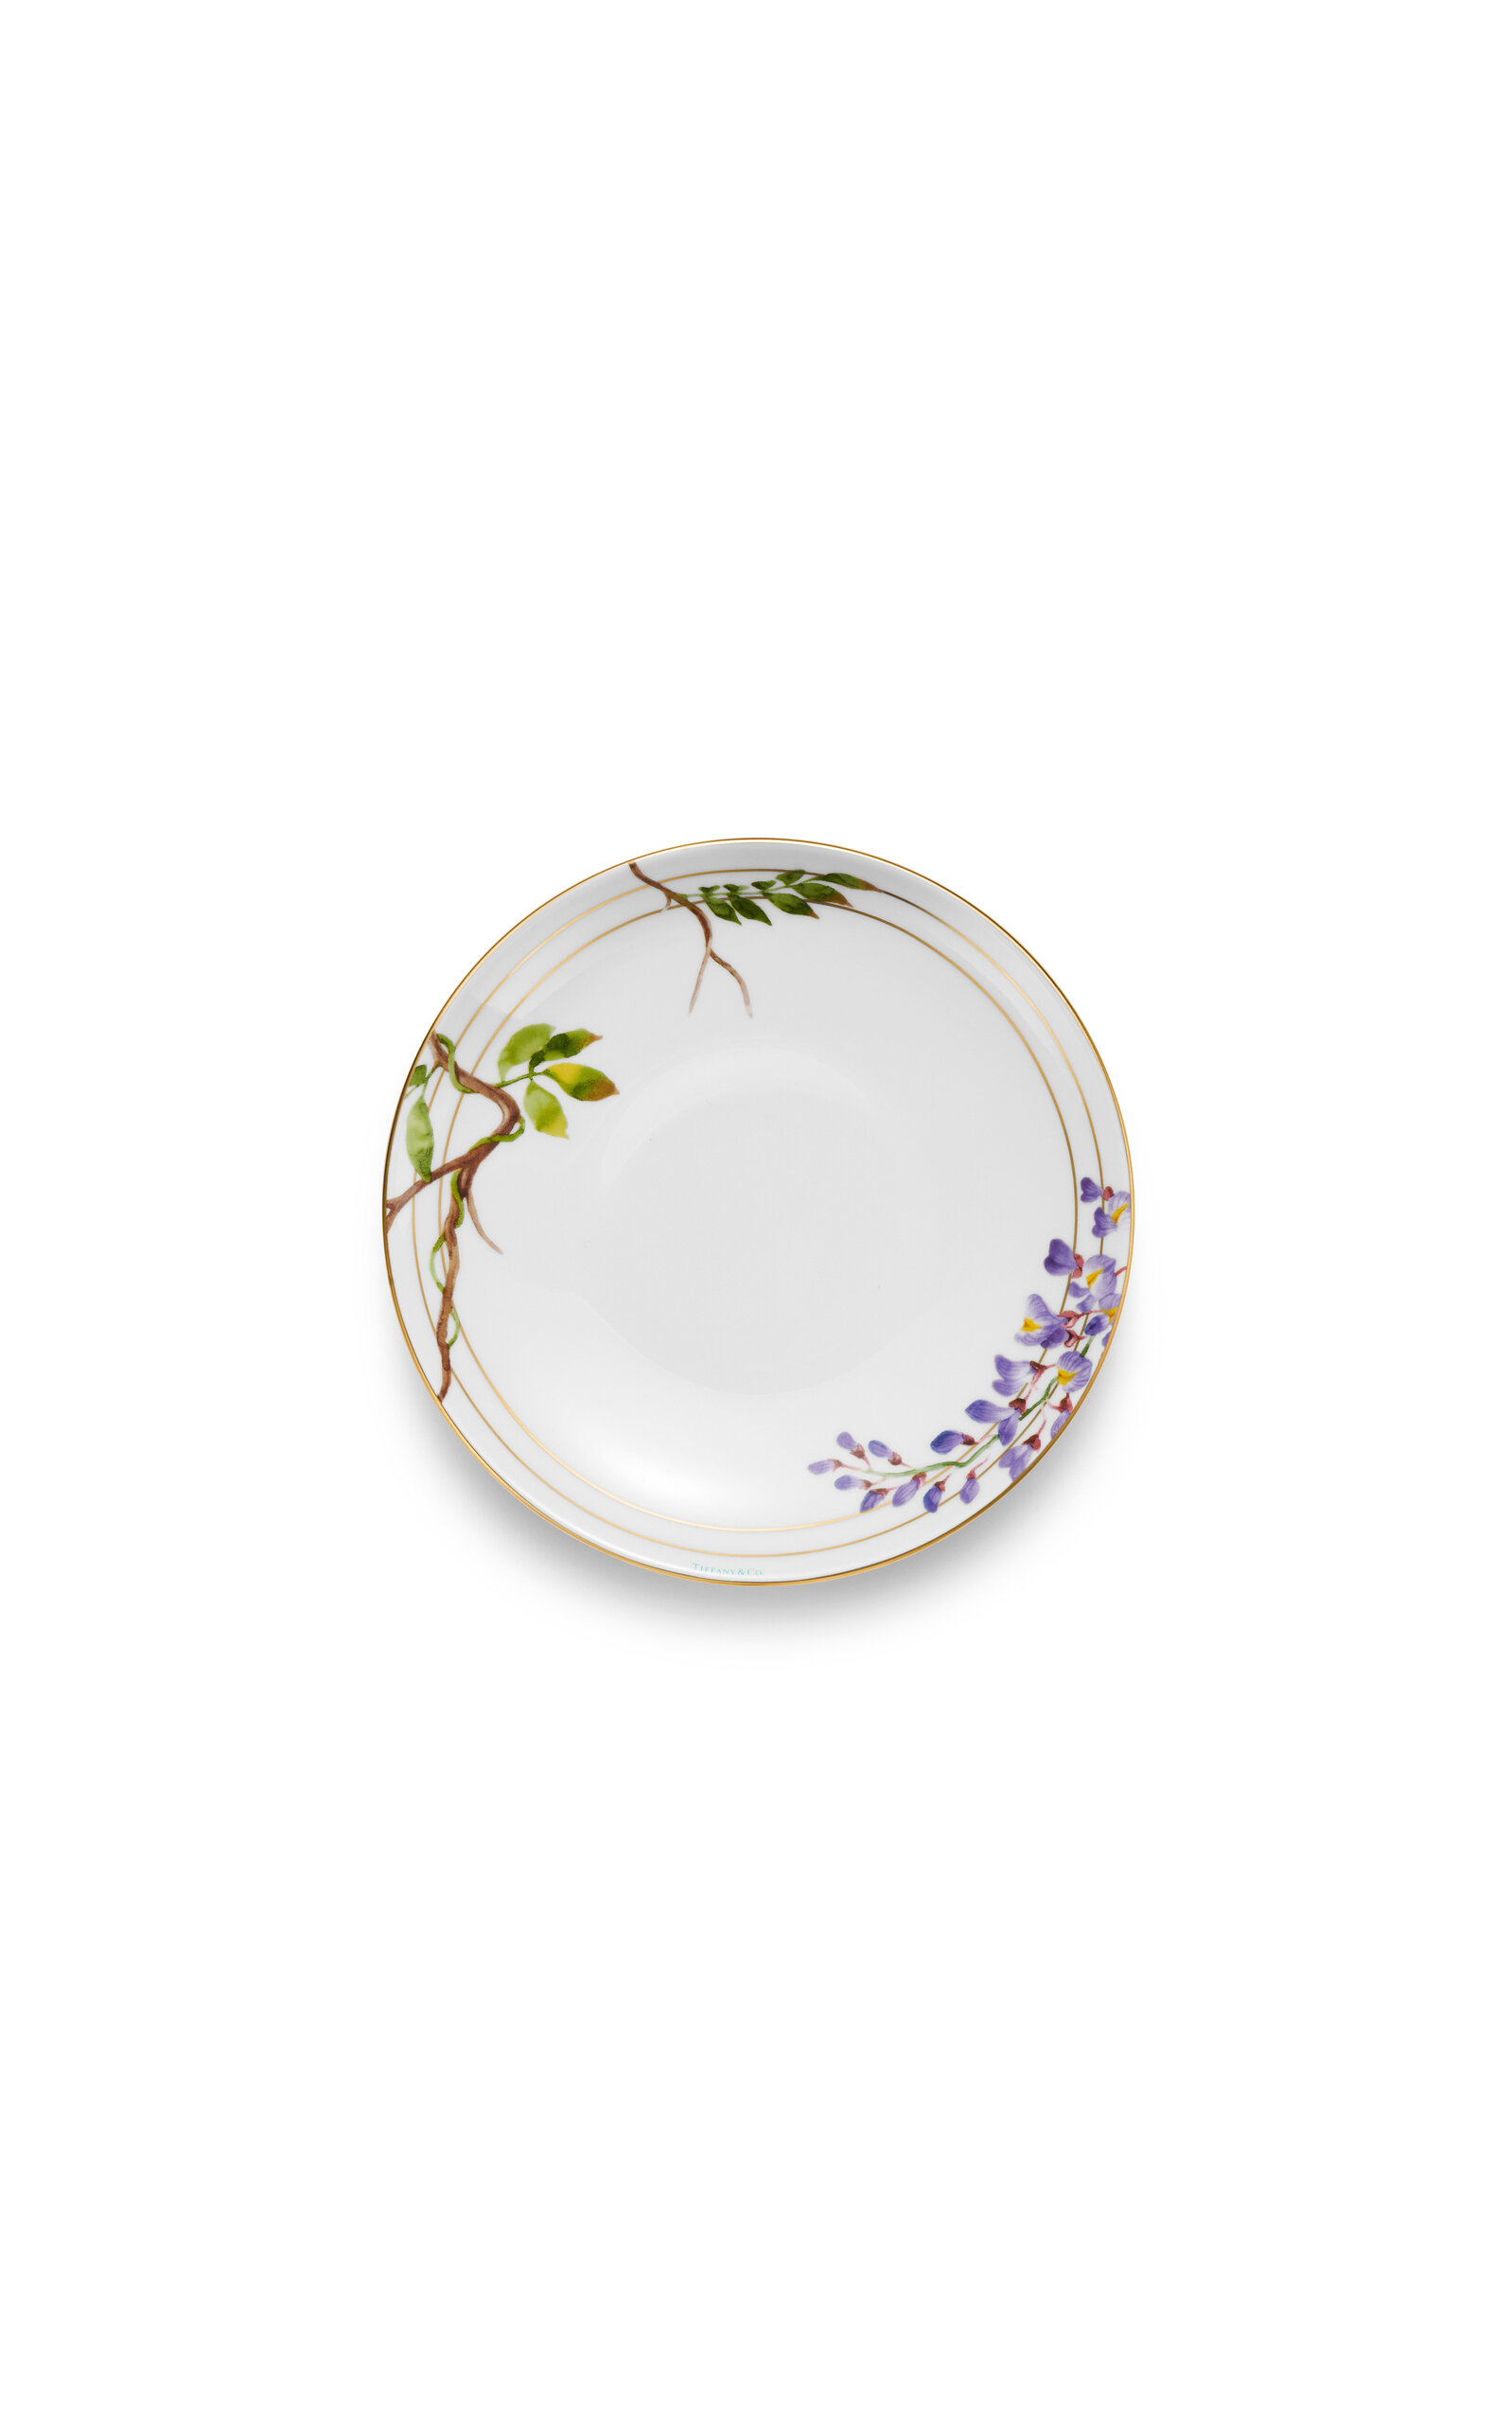 Tiffany & Co Wisteria Porcelain Bread And Butter Plate In Multi